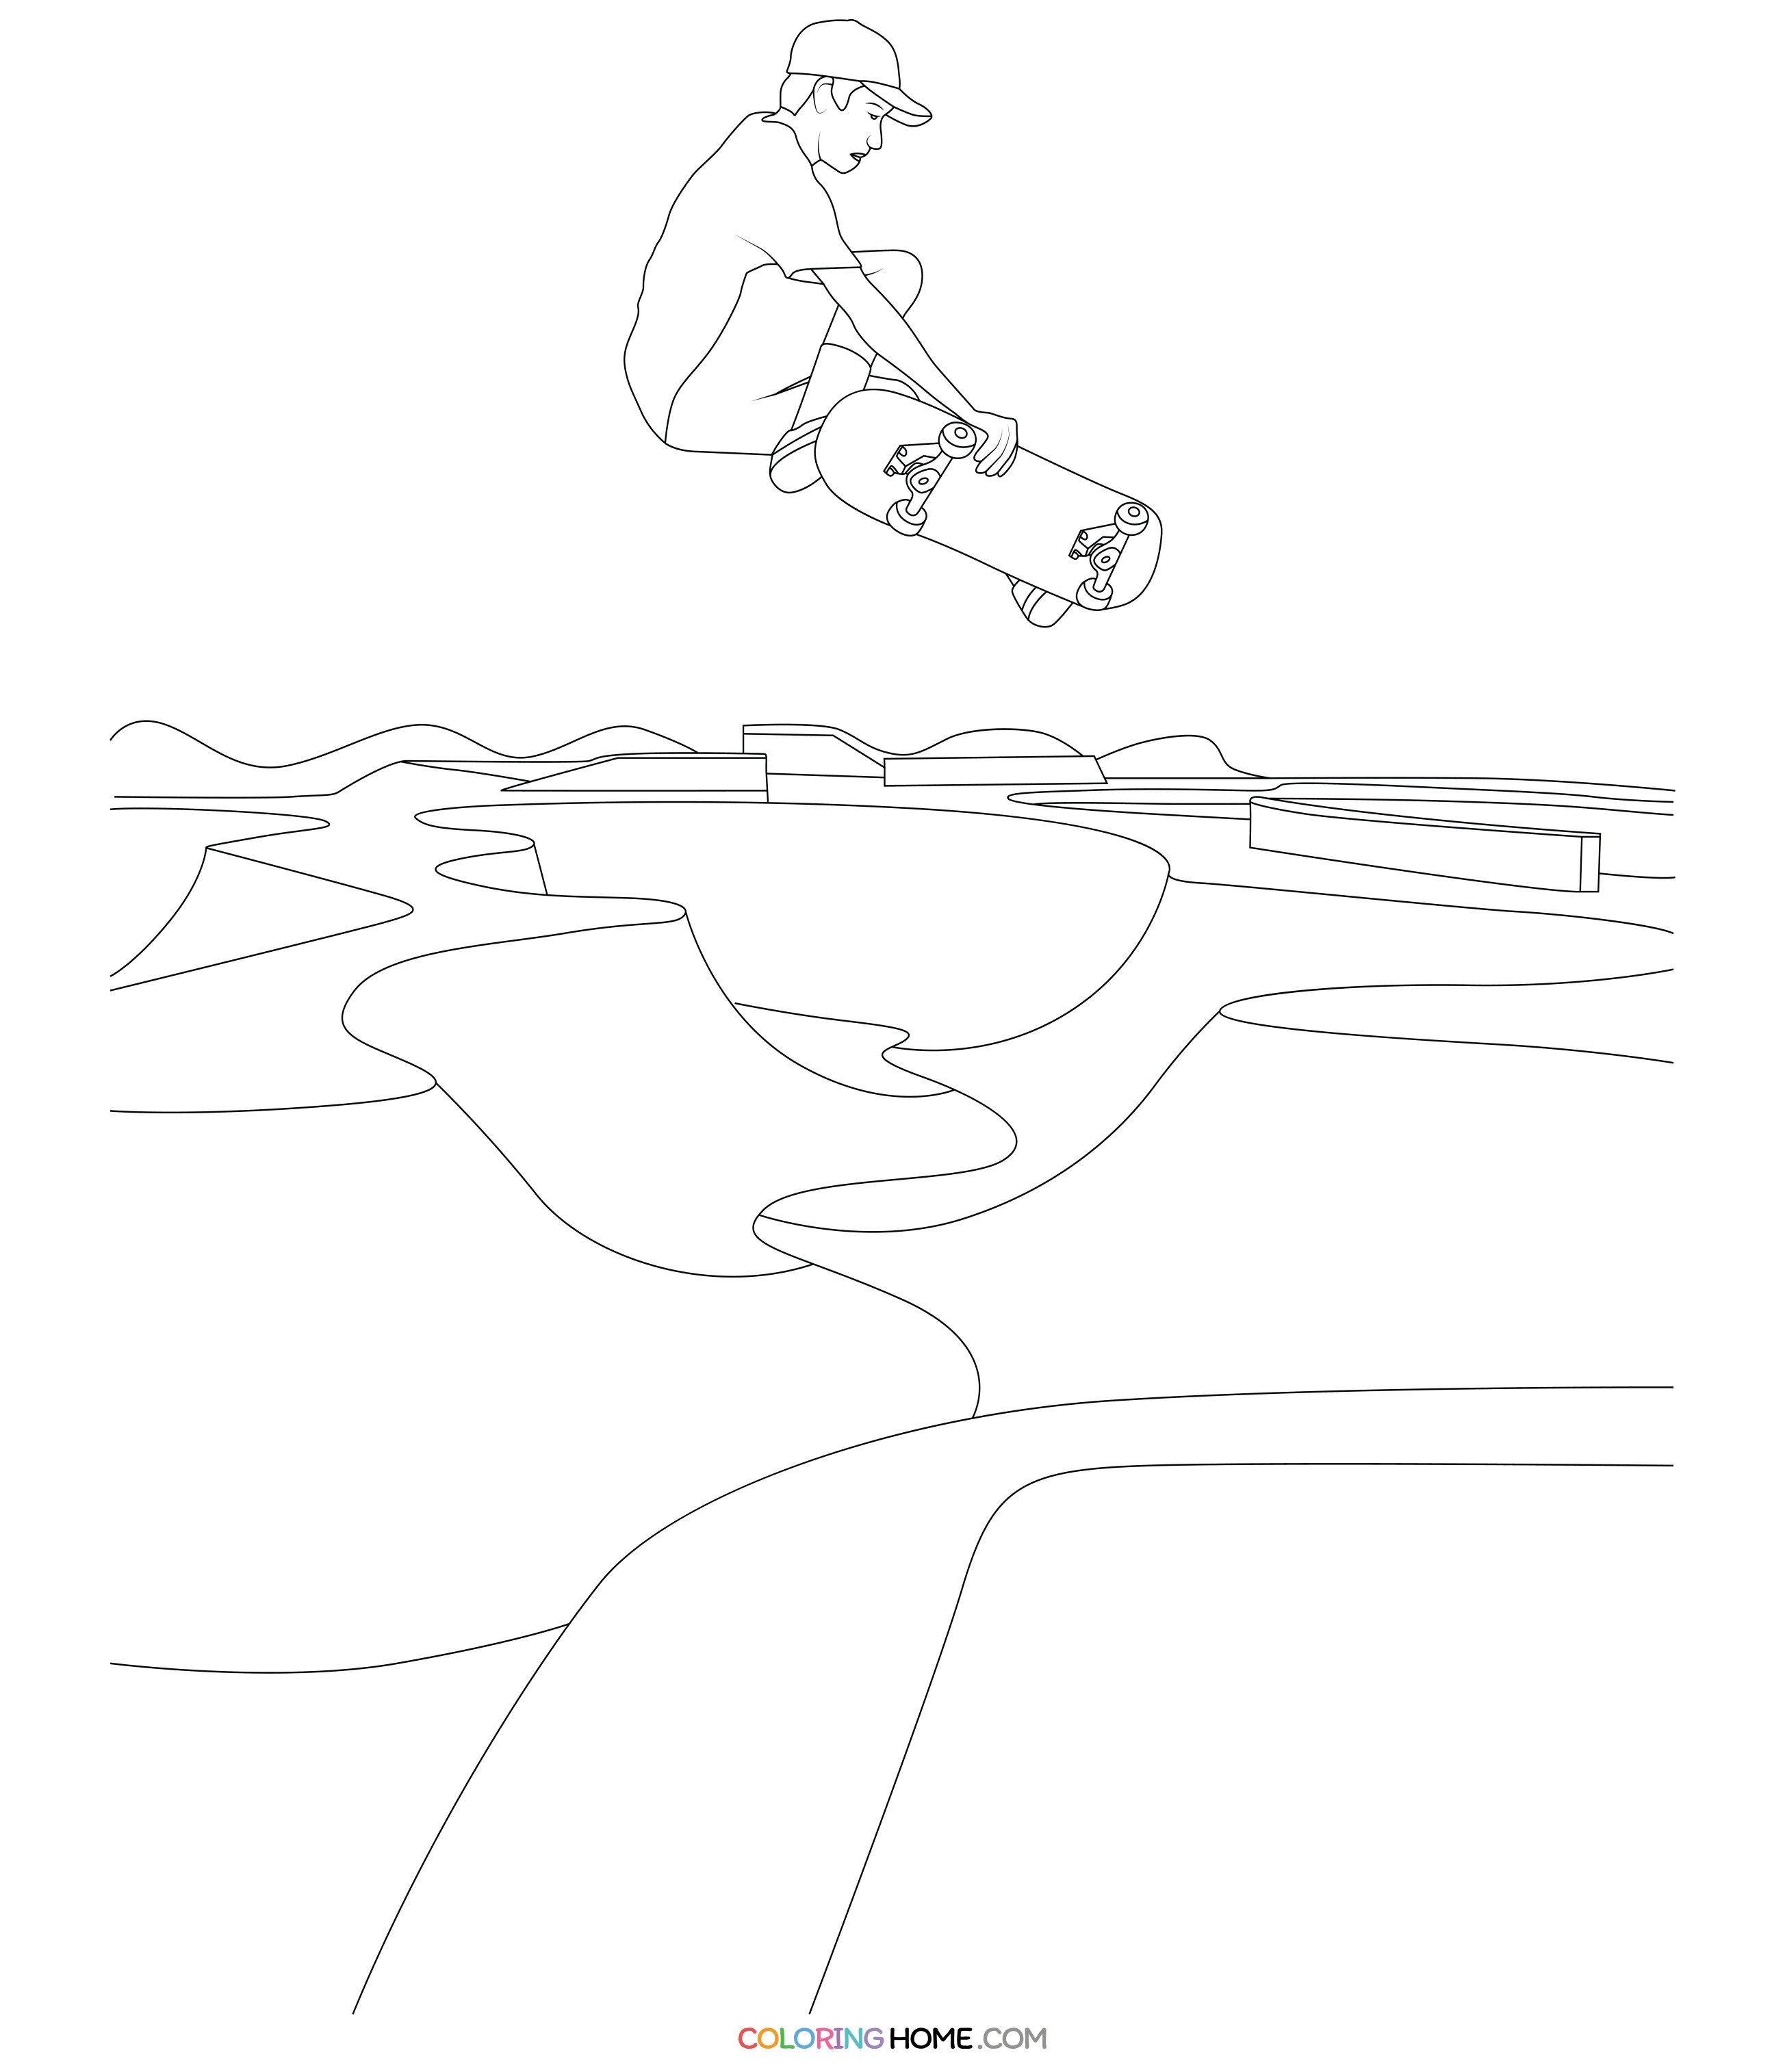 skate park coloring page